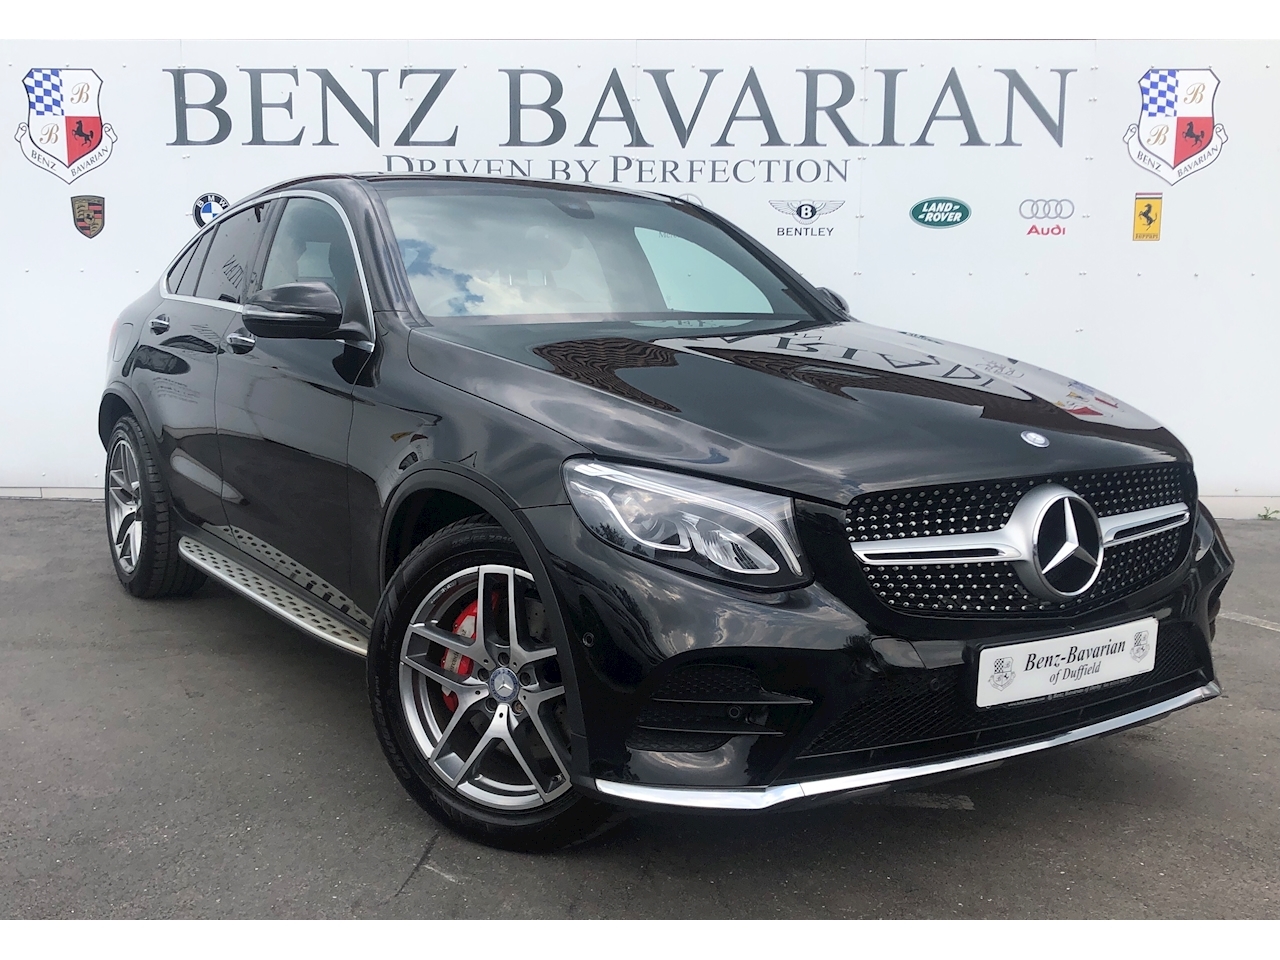 2.1 GLC220d AMG Line (Premium) Coupe 5dr Diesel G-Tronic 4MATIC (s/s) (170 ps)